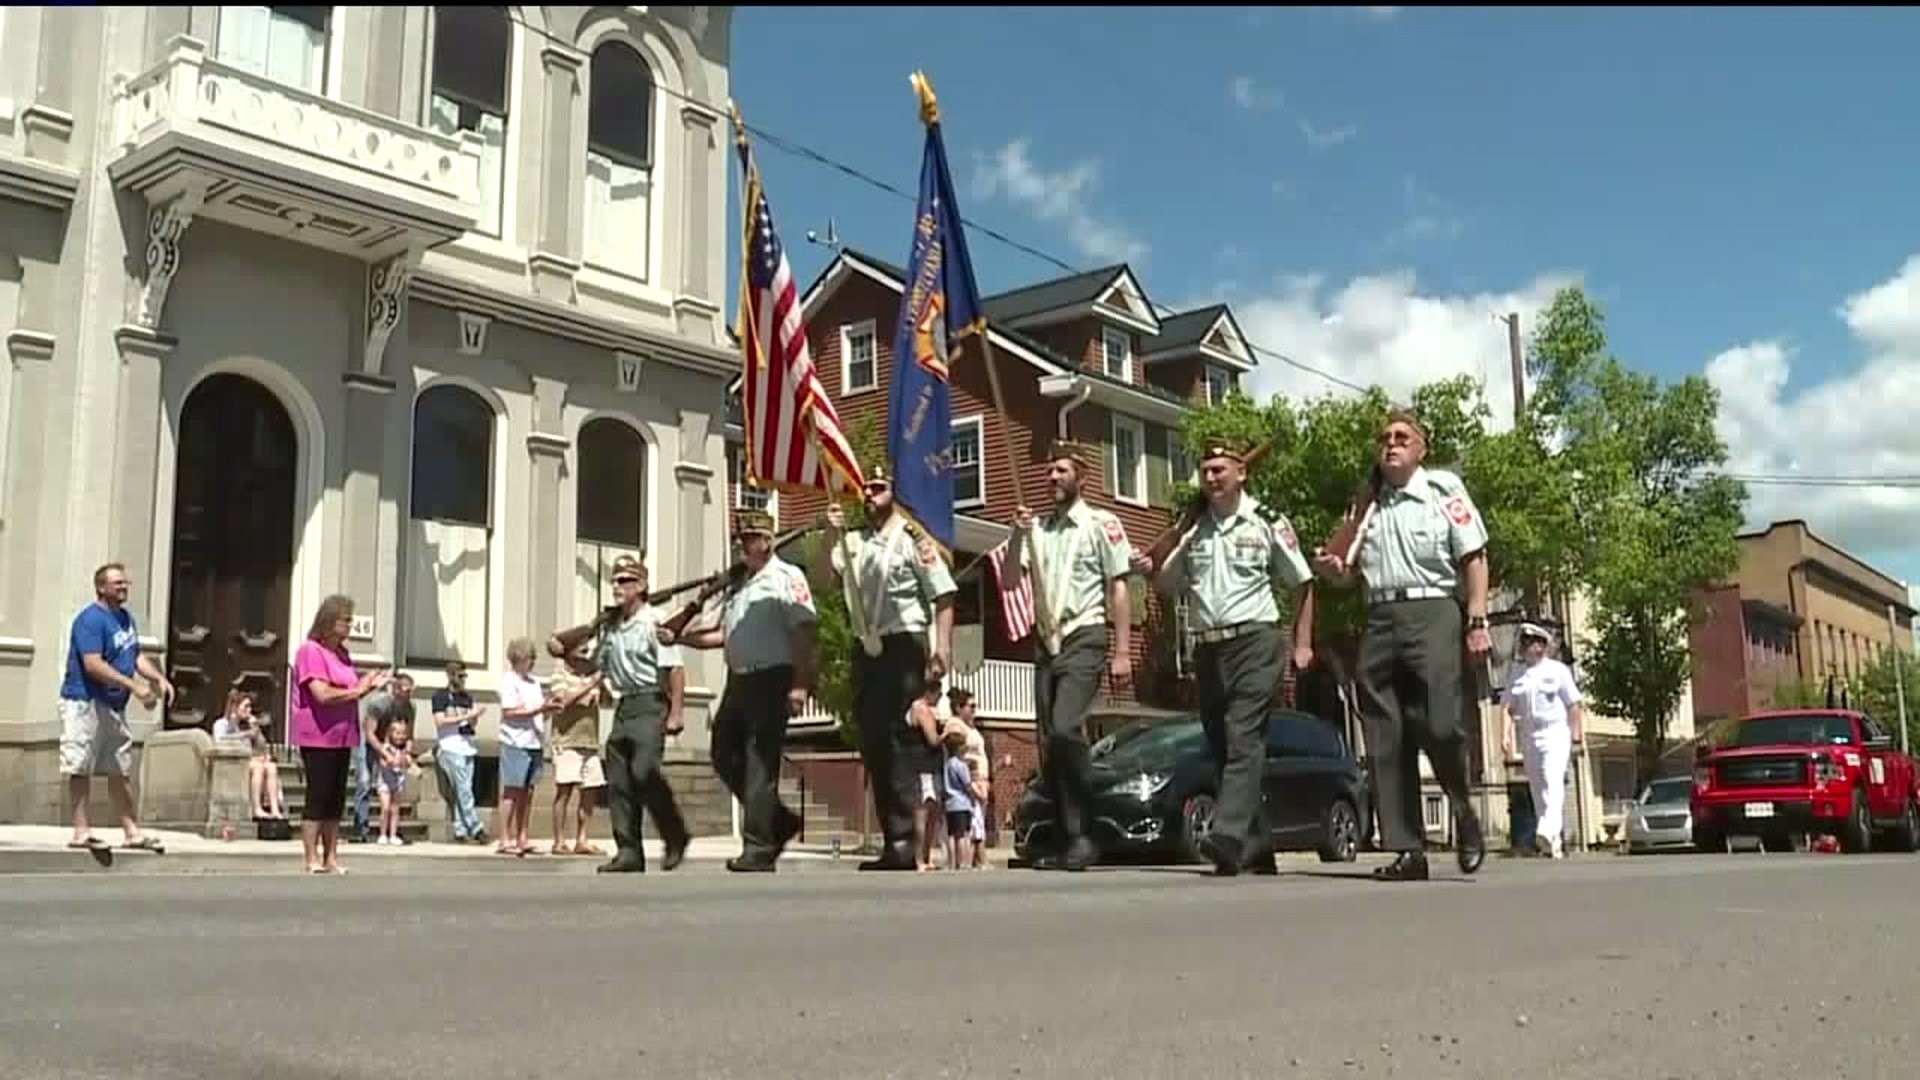 Sea of Red, White and Blue for Parade in Muncy